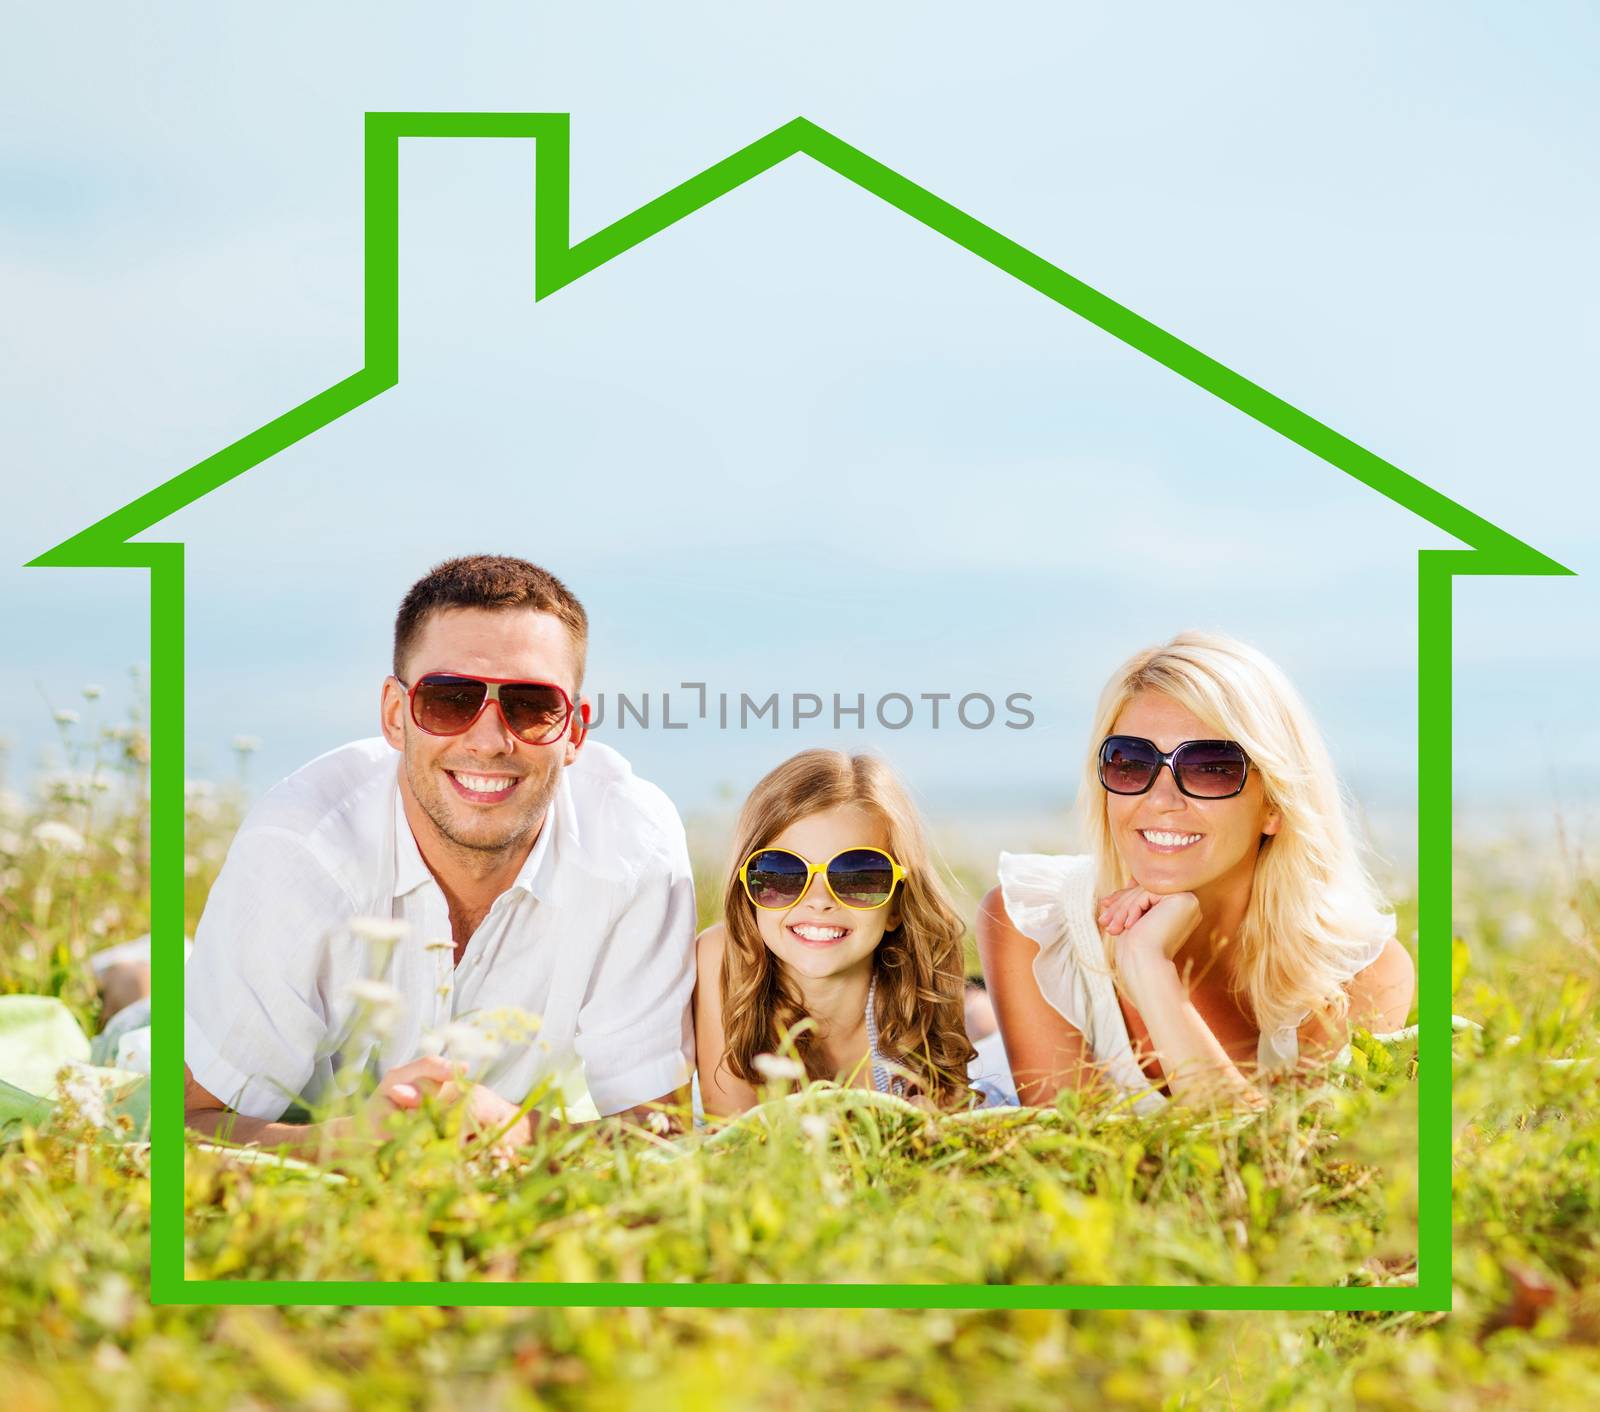 home, happiness and real estate concept - happy family in sunglasses lying on a grass with house shaped illustration